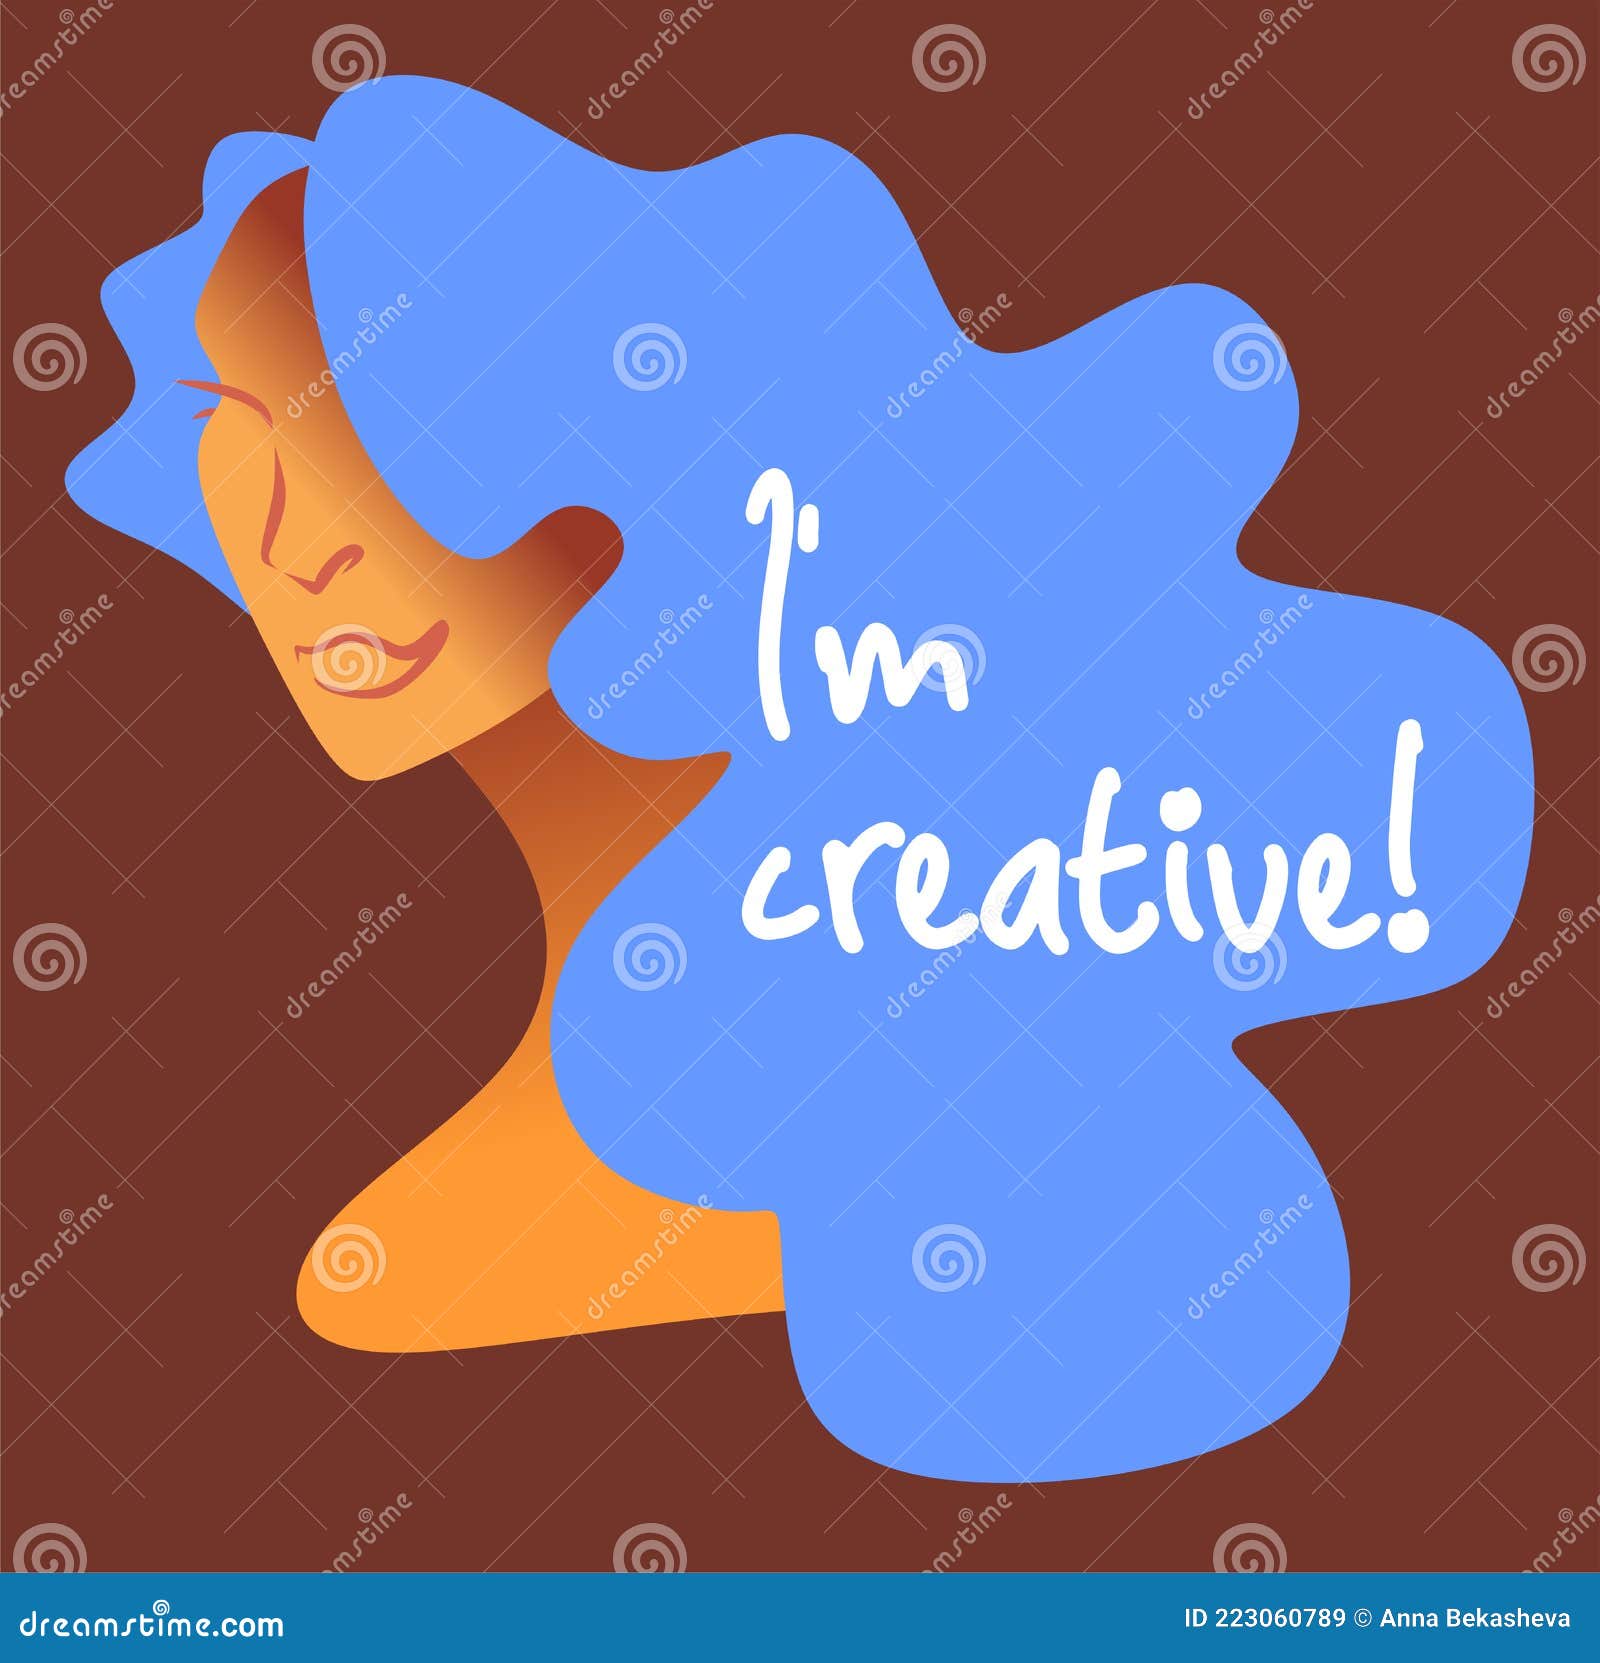 Mulattoes Cartoons, Illustrations & Vector Stock Images - 15 Pictures ...